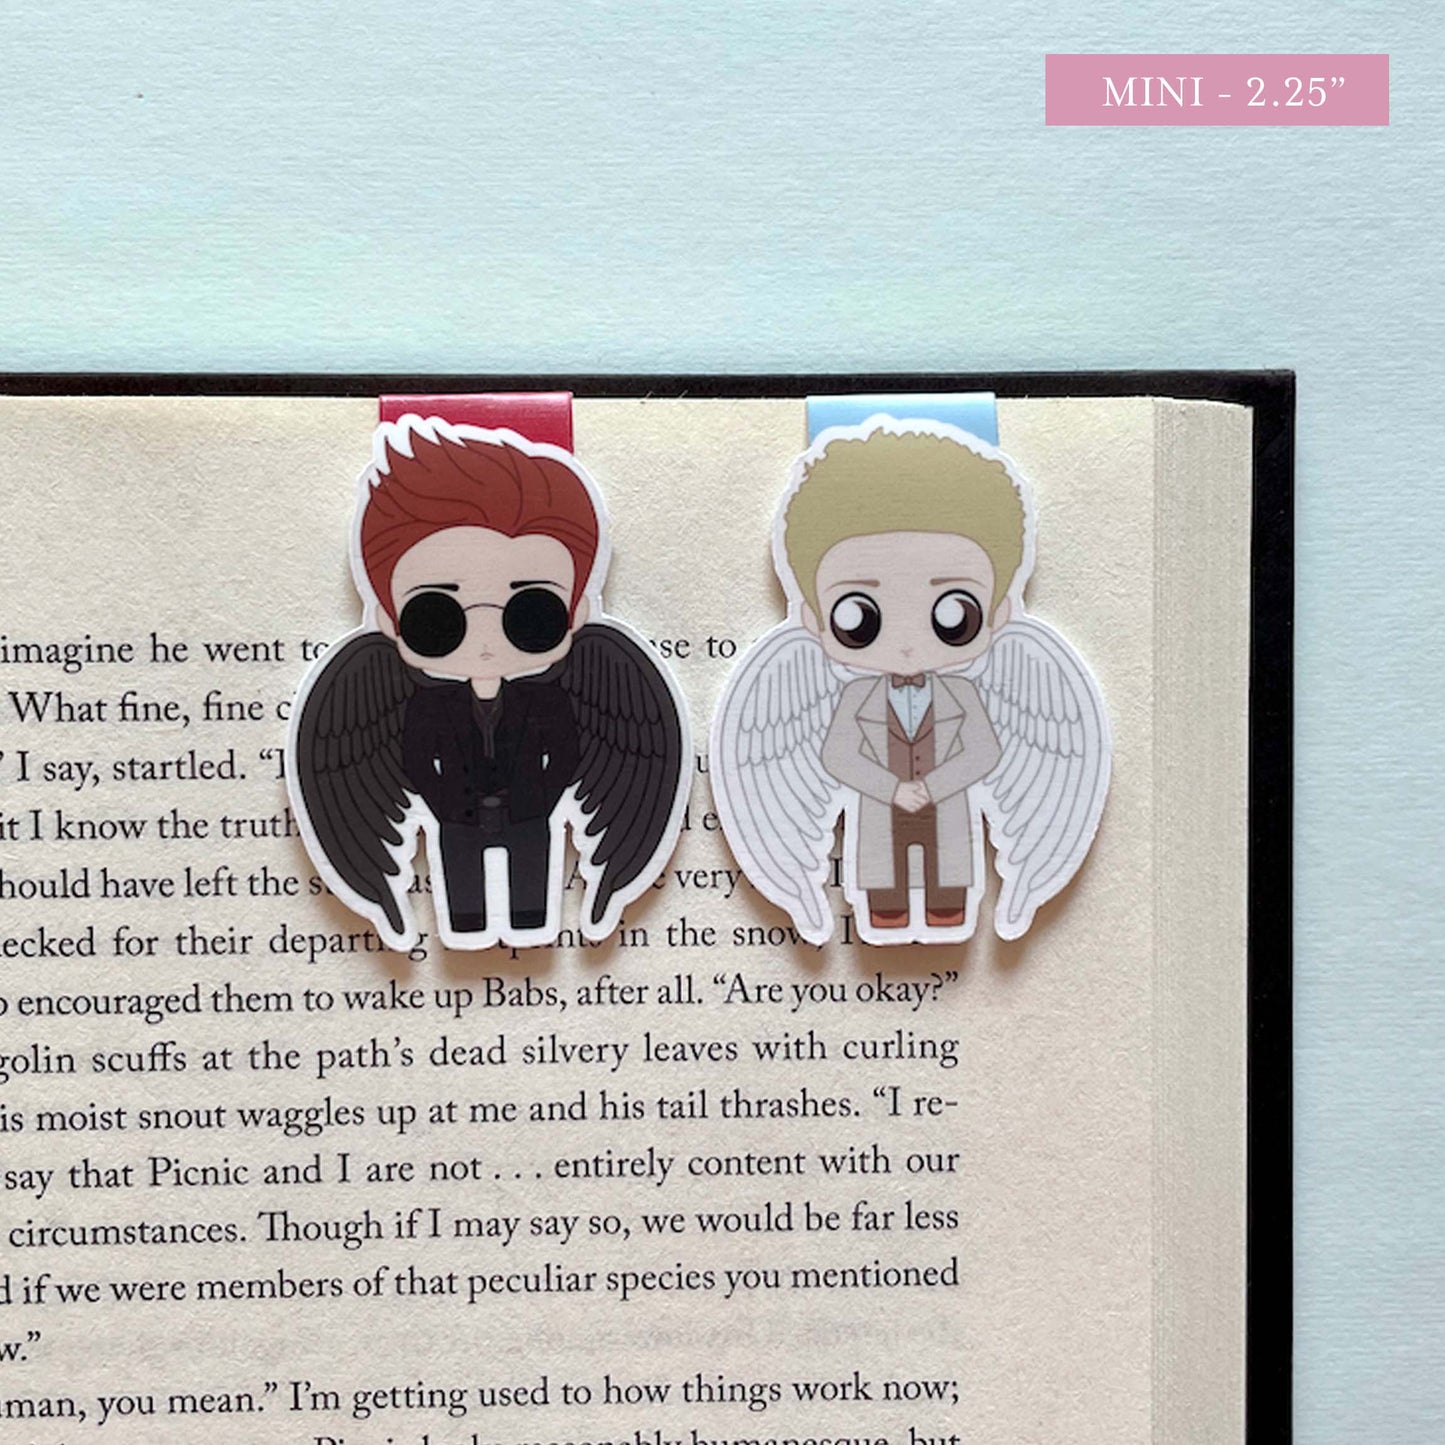 Good Omens "Winged Crowley & Aziraphale" Magnetic Bookmark Set